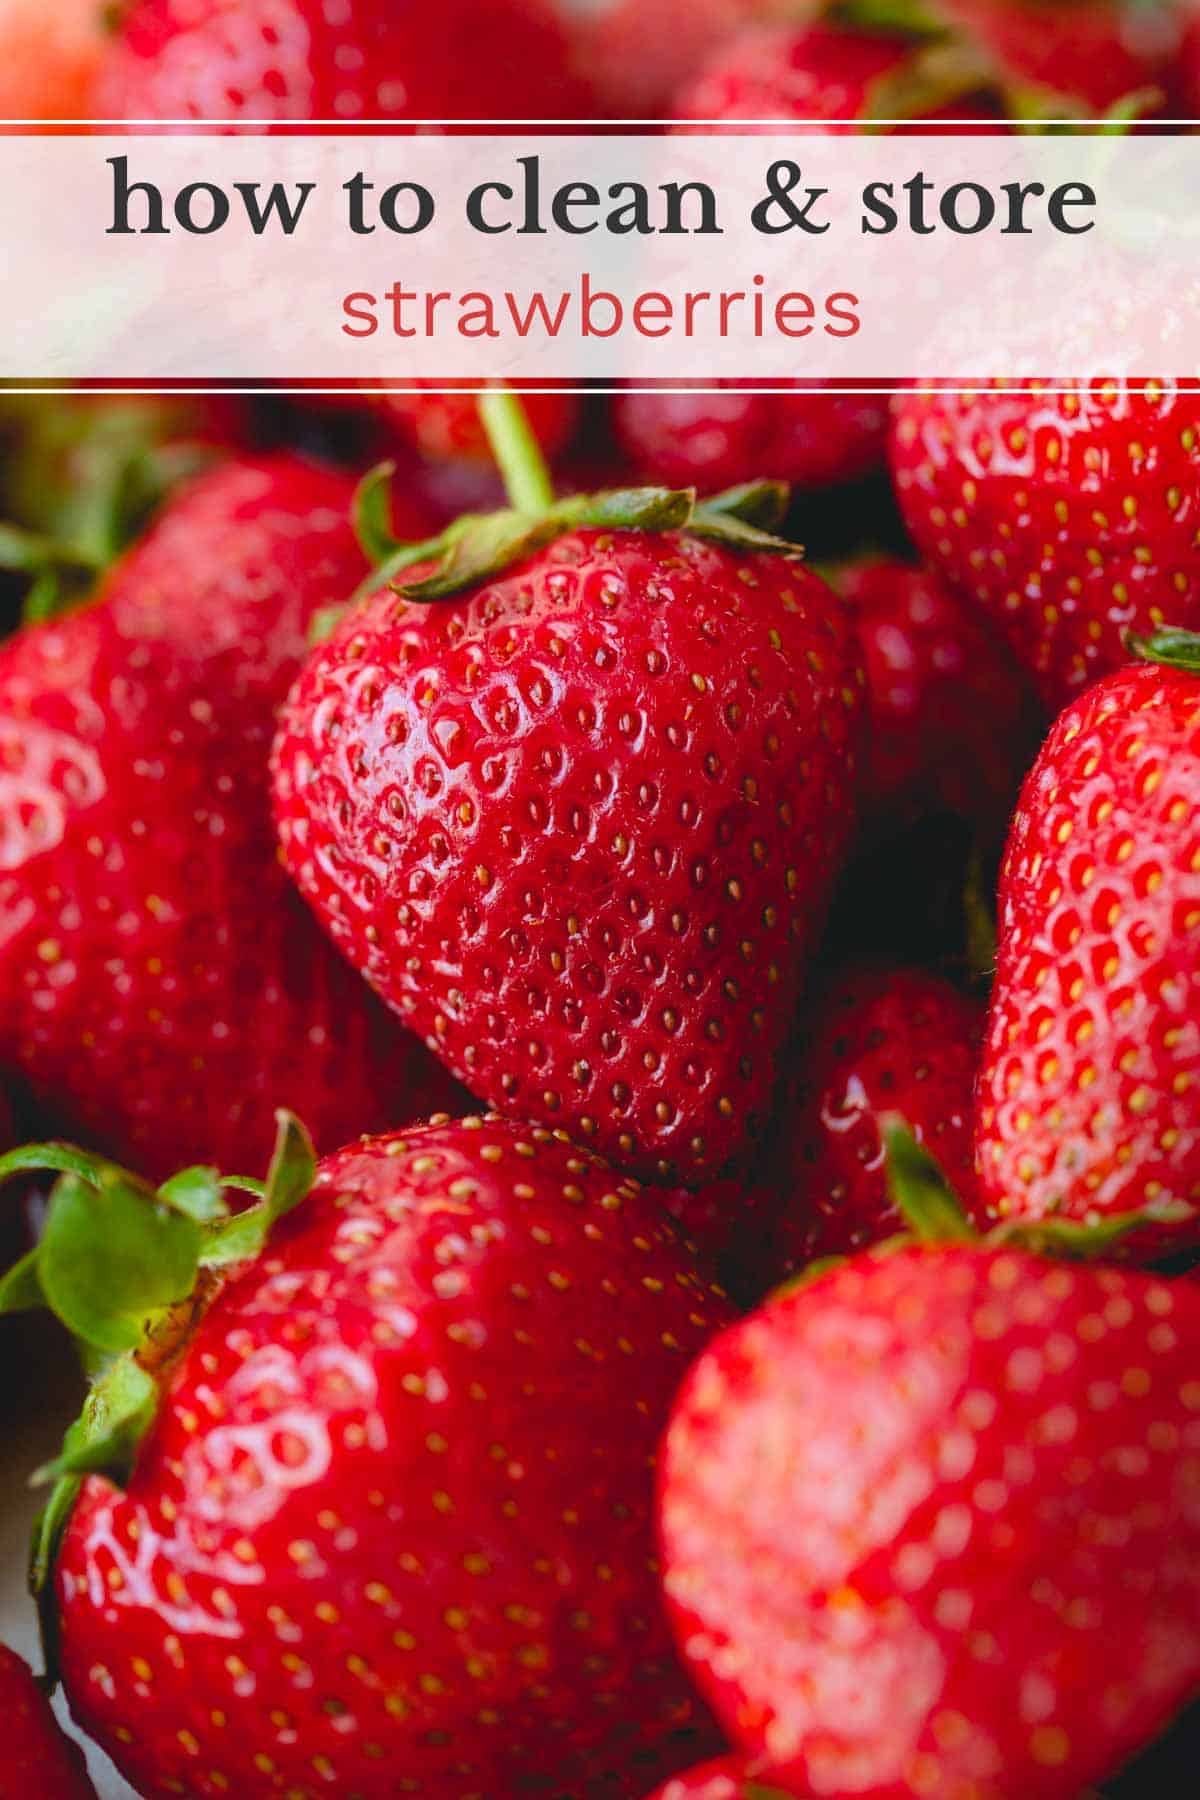 An image of strawberries with text banner that reads "how to clean & store strawberries".